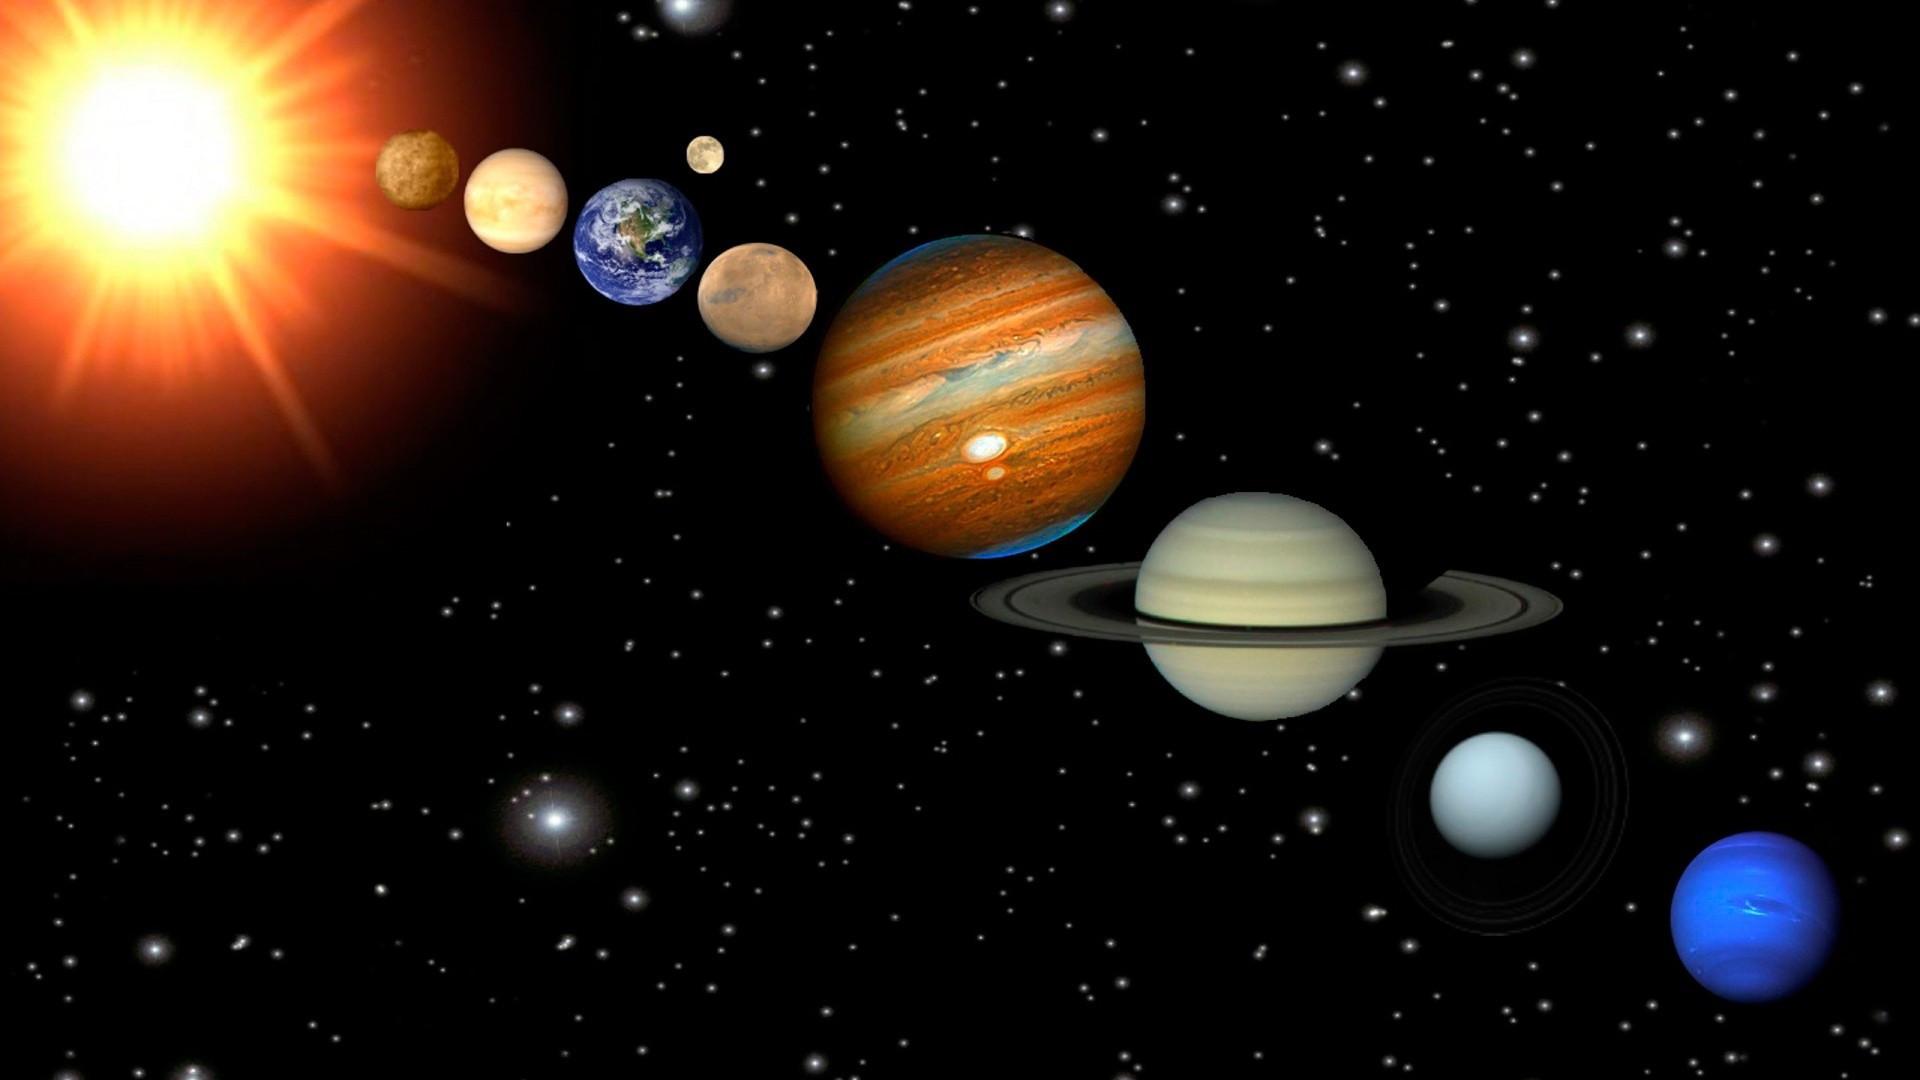 Planet Parade 2022: 4 Planets To Line Up From April 16 to April 24